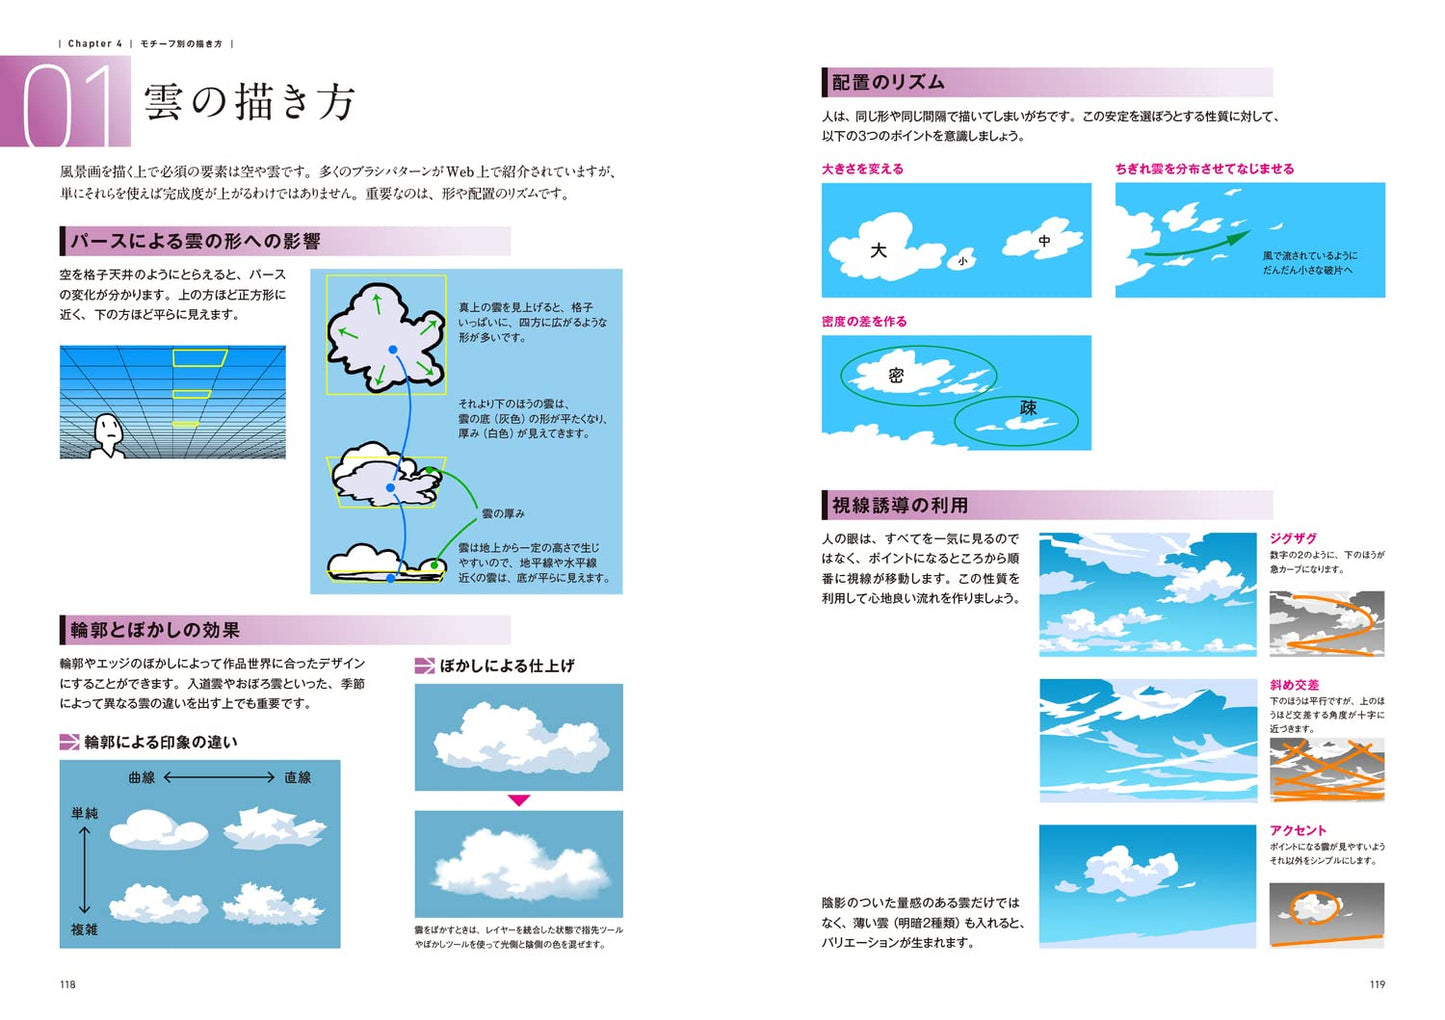 Basic rules of background painting taught at anime studio